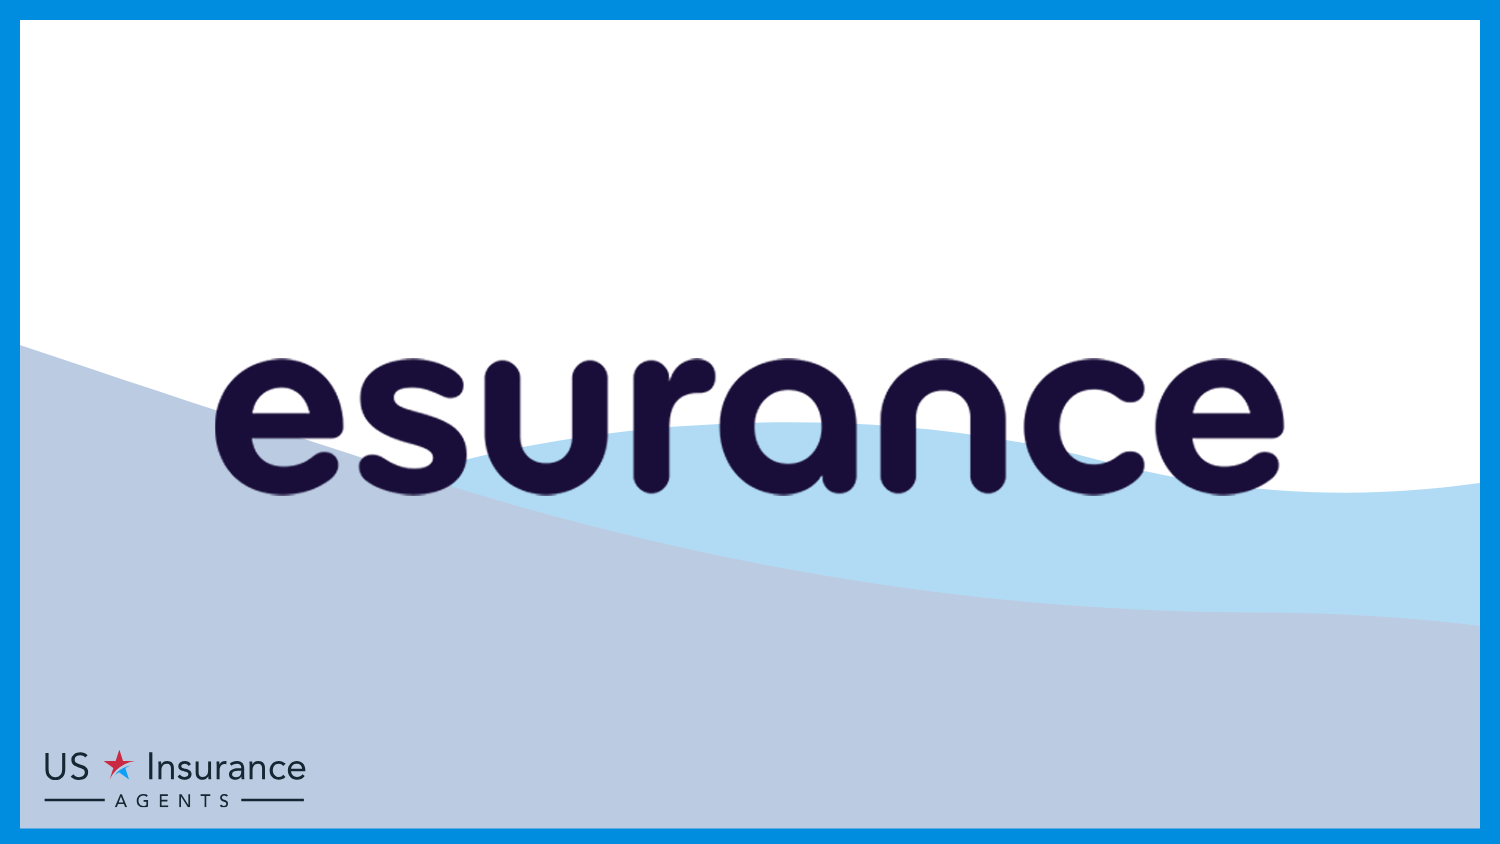 Esurance: Best Auto Insurance for Students